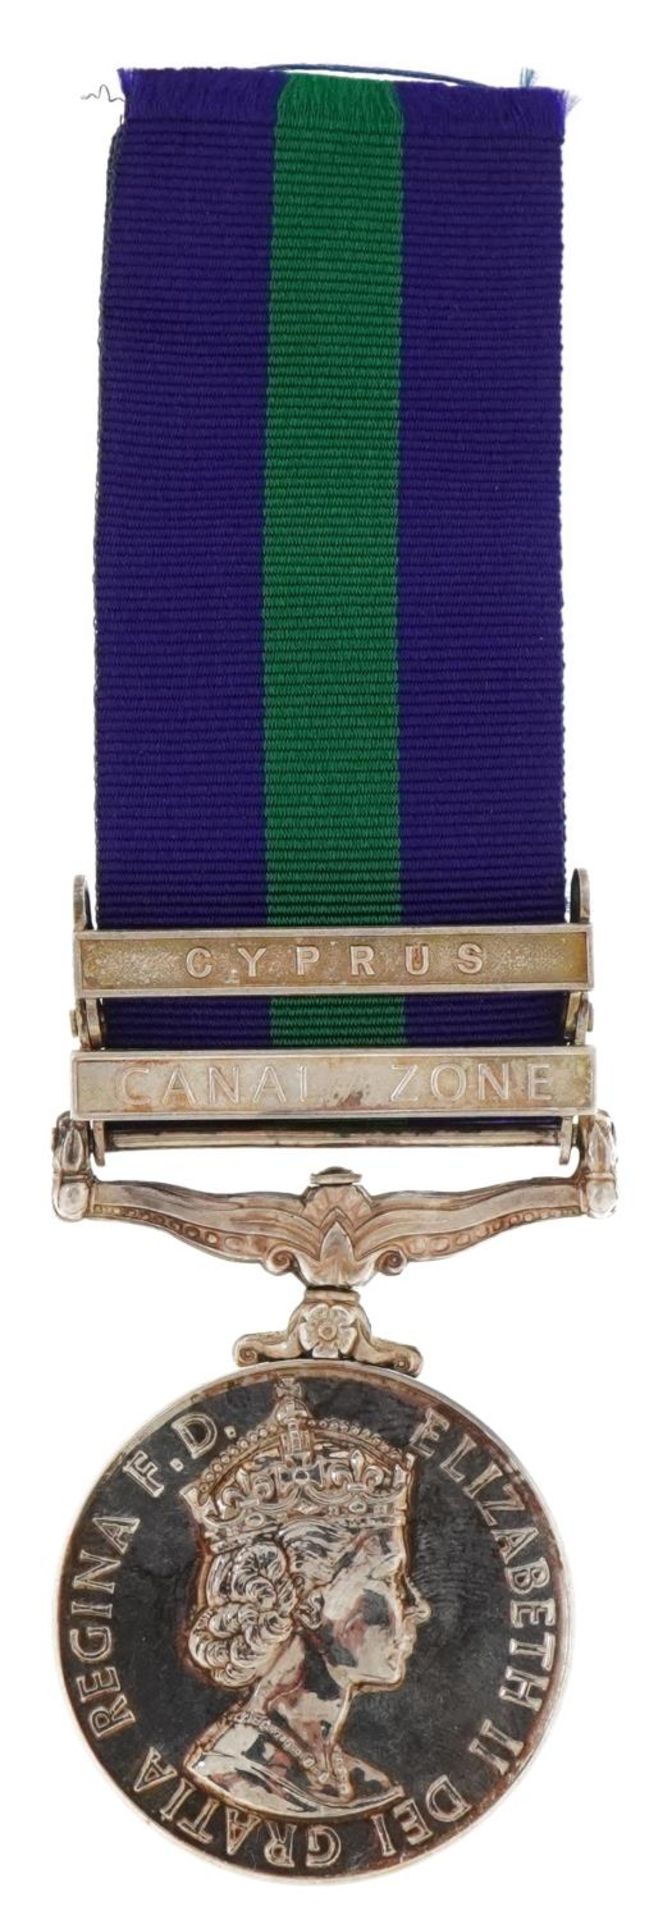 Elizabeth II General Service medal awarded to T/22994931DVR.G.J.WILLIAMS.RASC with Cyprus and - Image 2 of 4